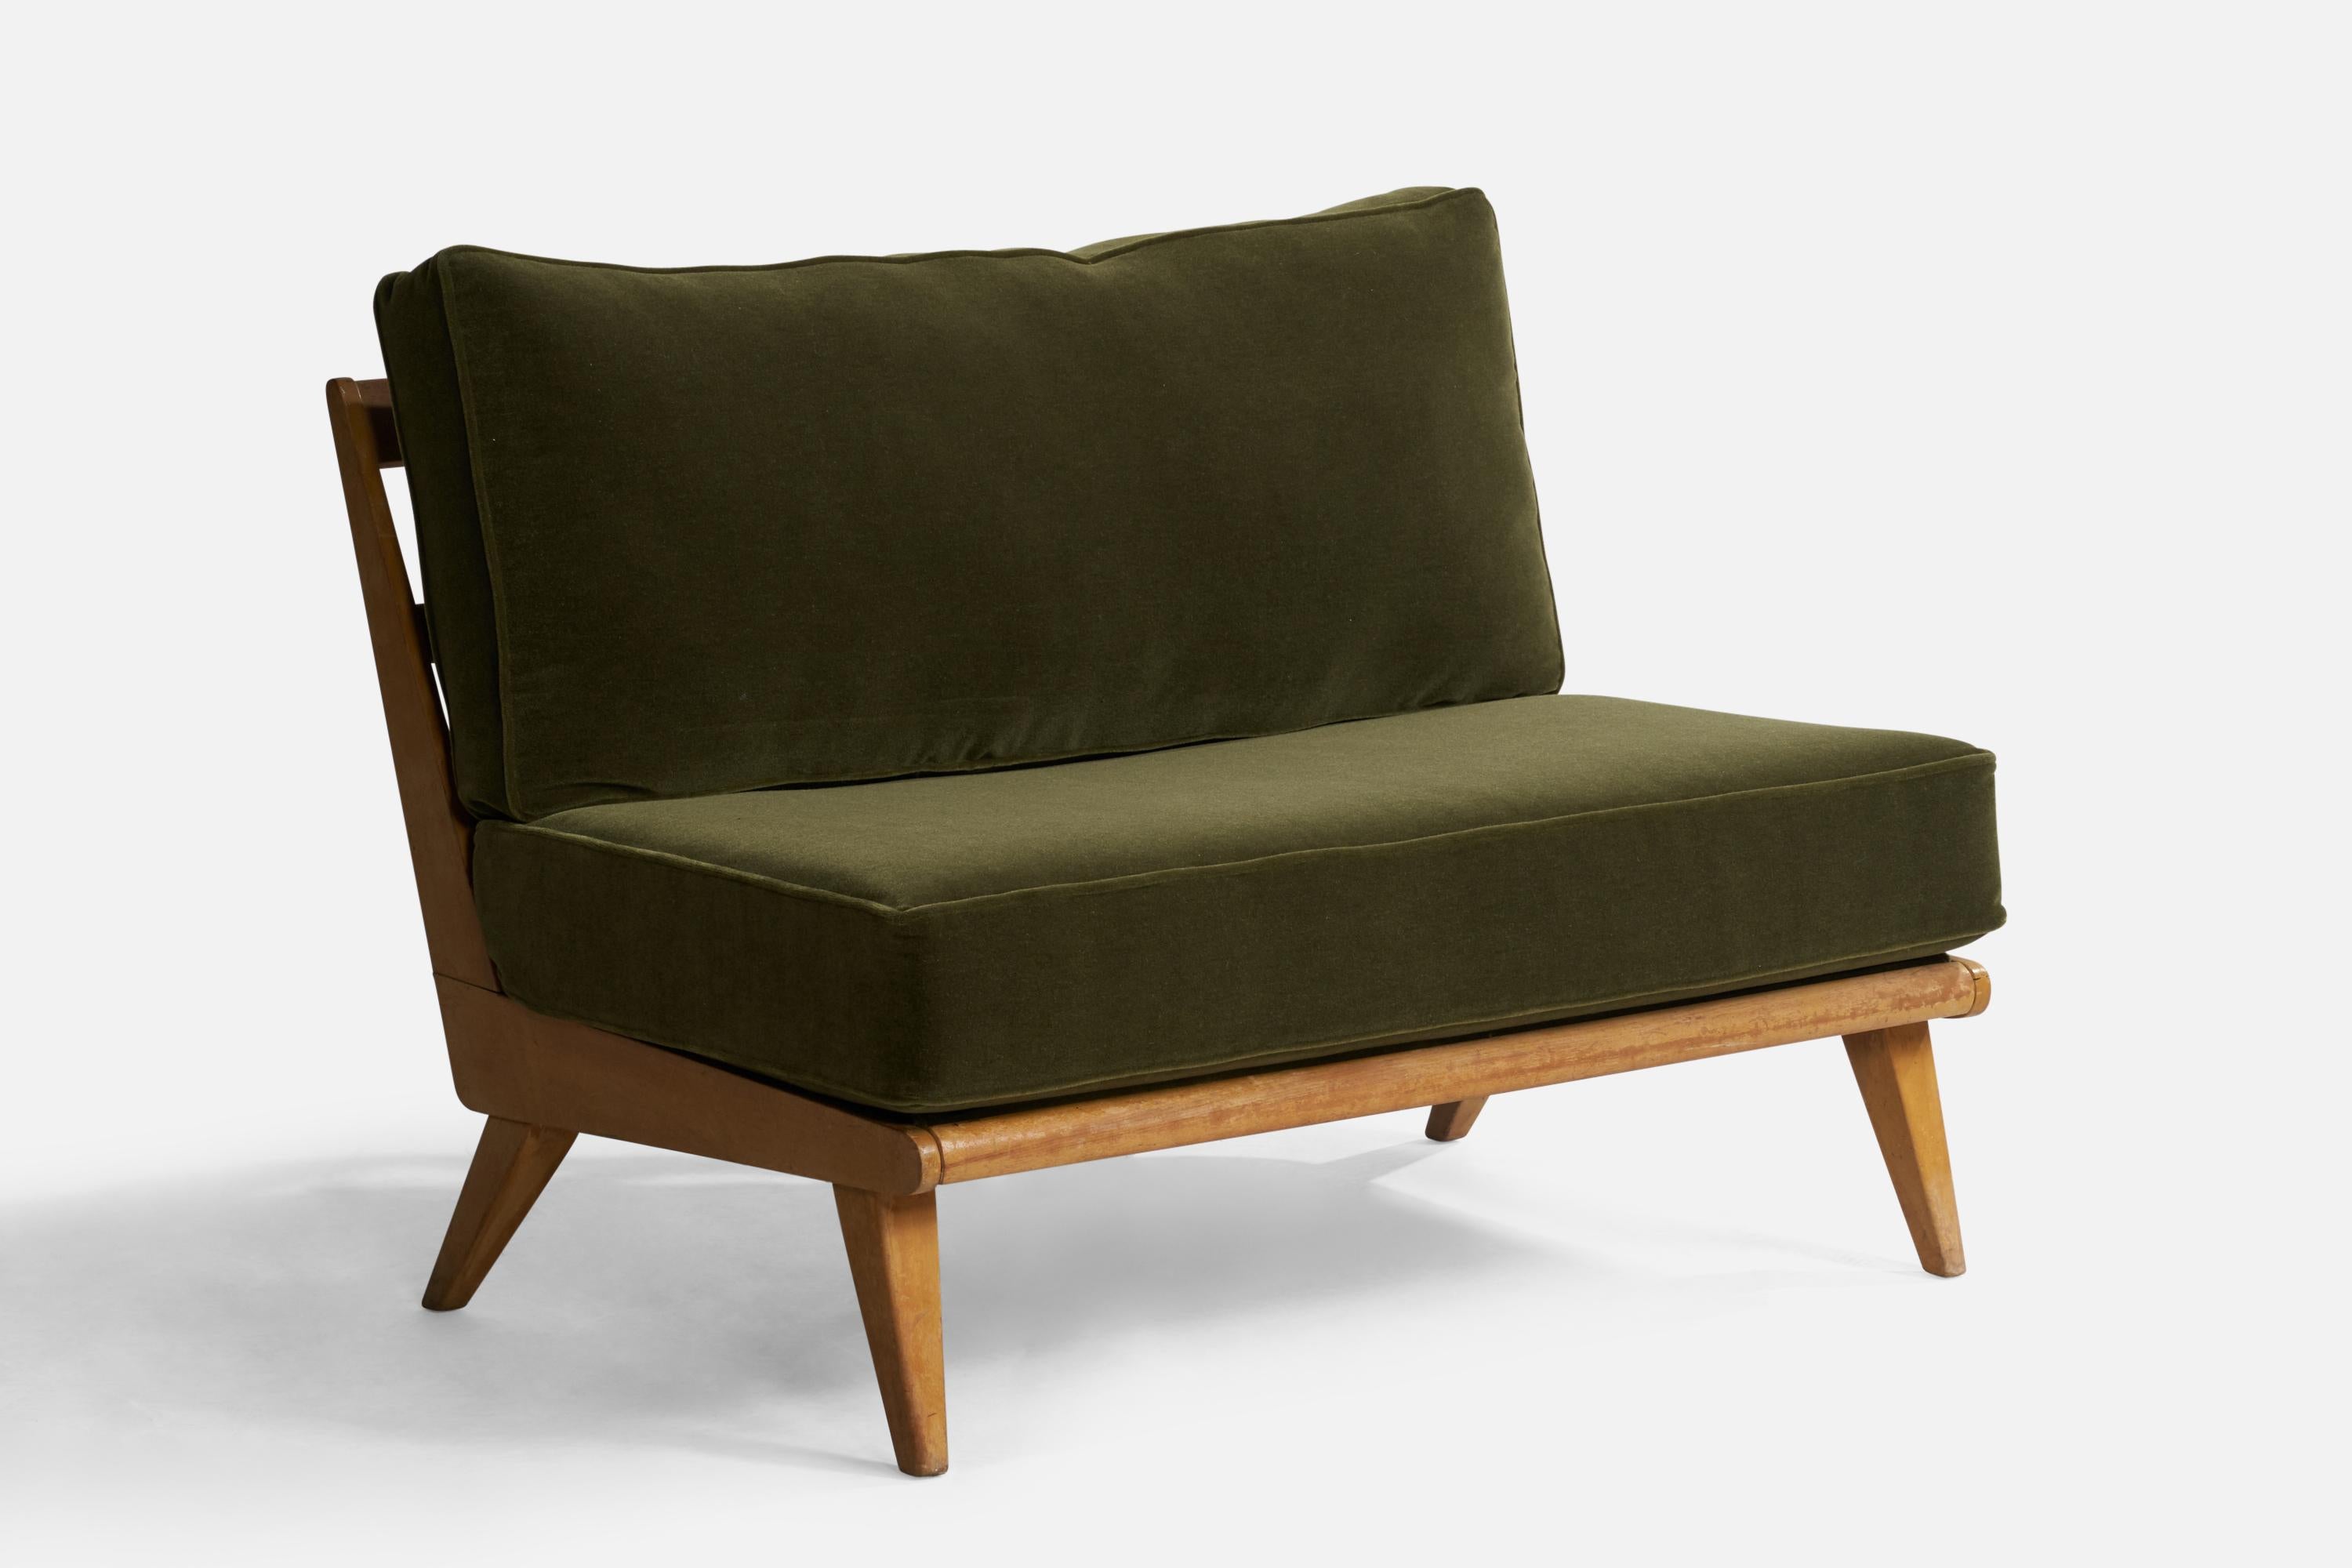 A maple and green mohair fabric settee designed and produced by Heywood Wakefield, USA, 1950s.

Seat height 18.5”

Reupholstered in brand new mohair